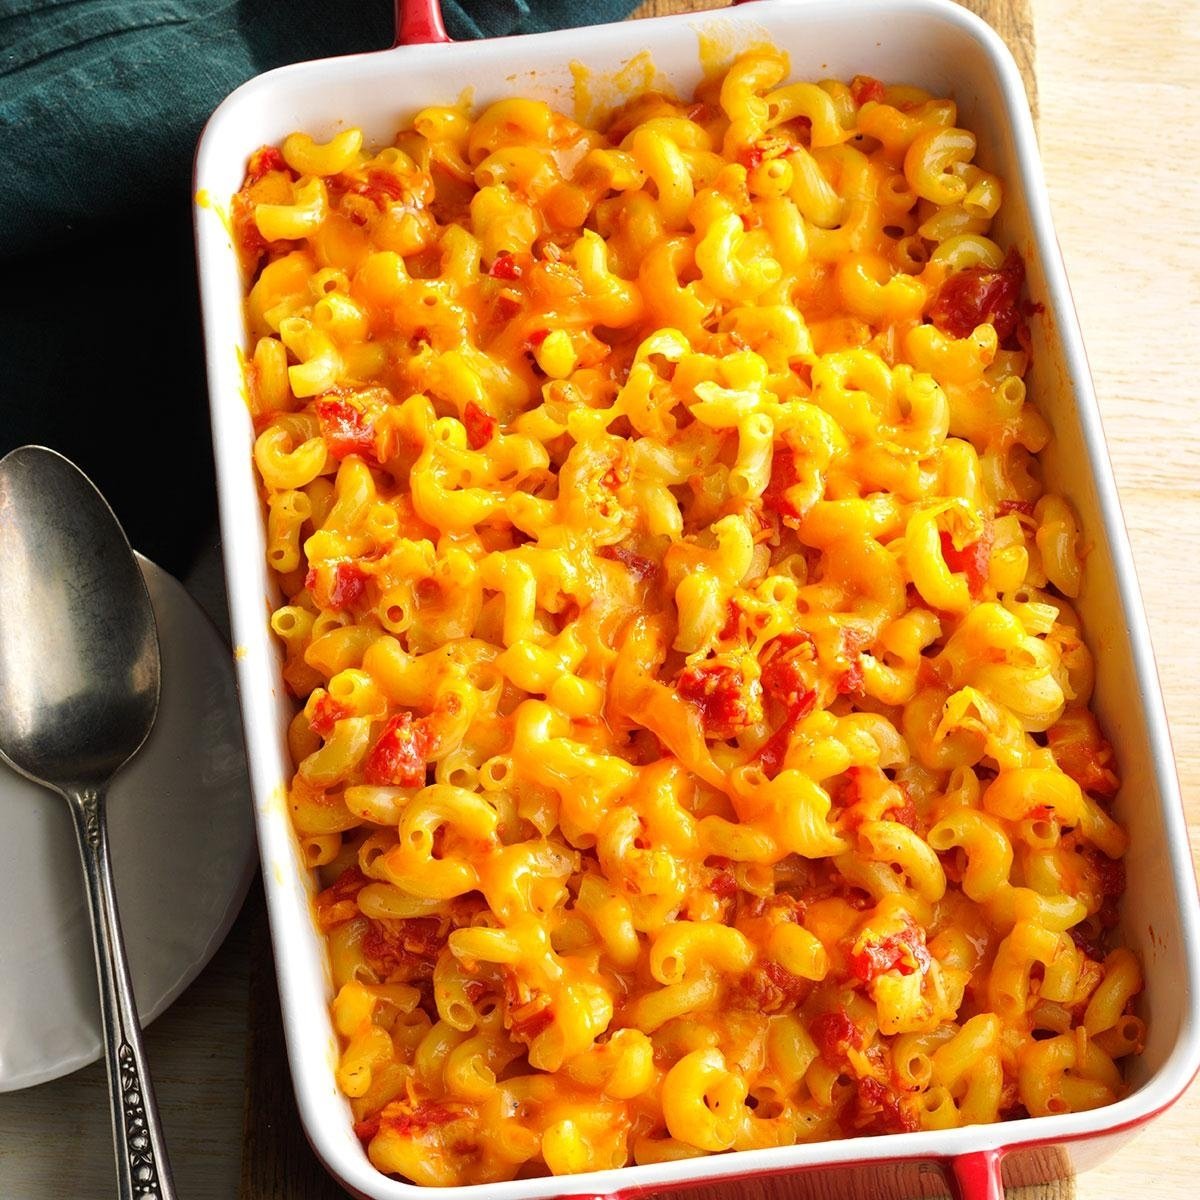 10 Attractive Mac And Cheese Dinner Ideas my mothers mac and cheese recipe taste of home 2022